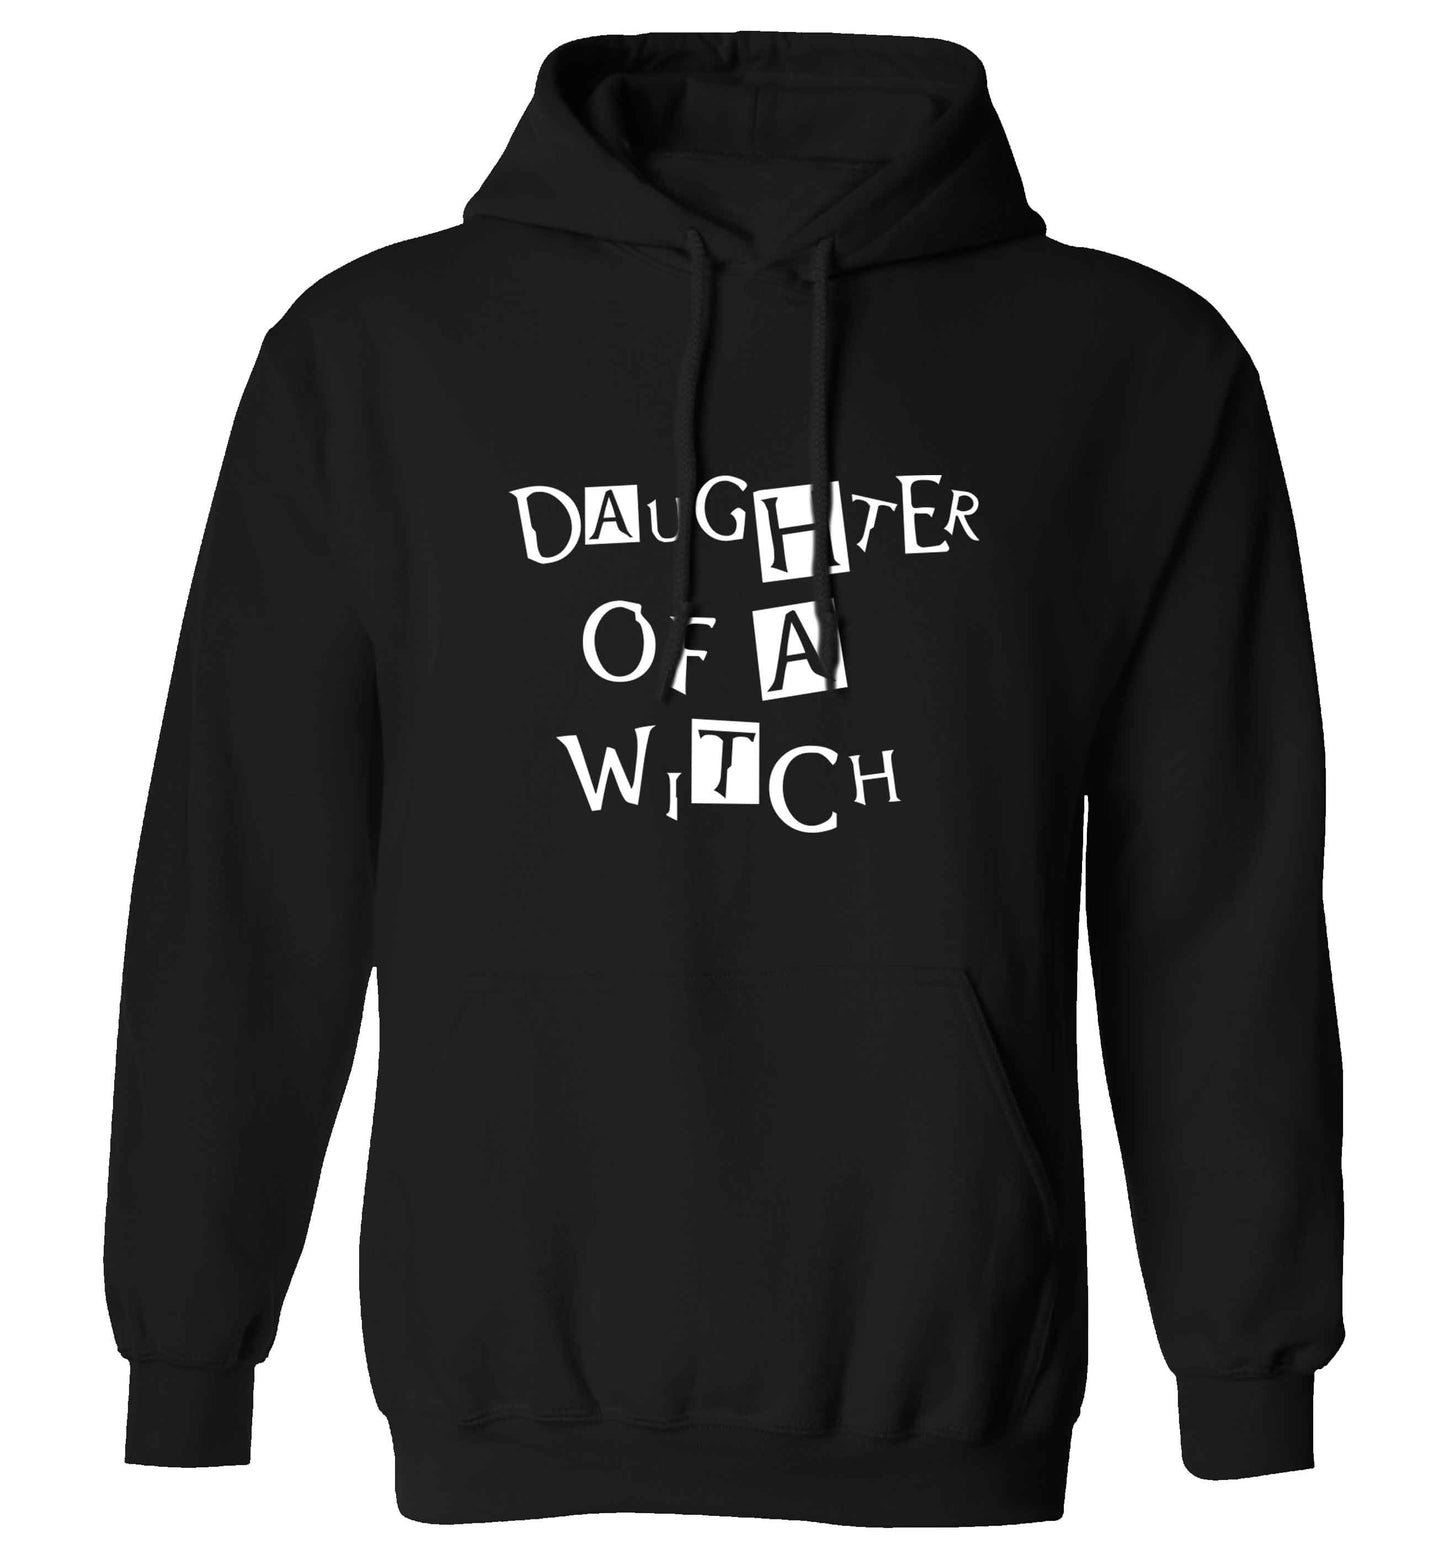 Daughter of a witch adults unisex black hoodie 2XL